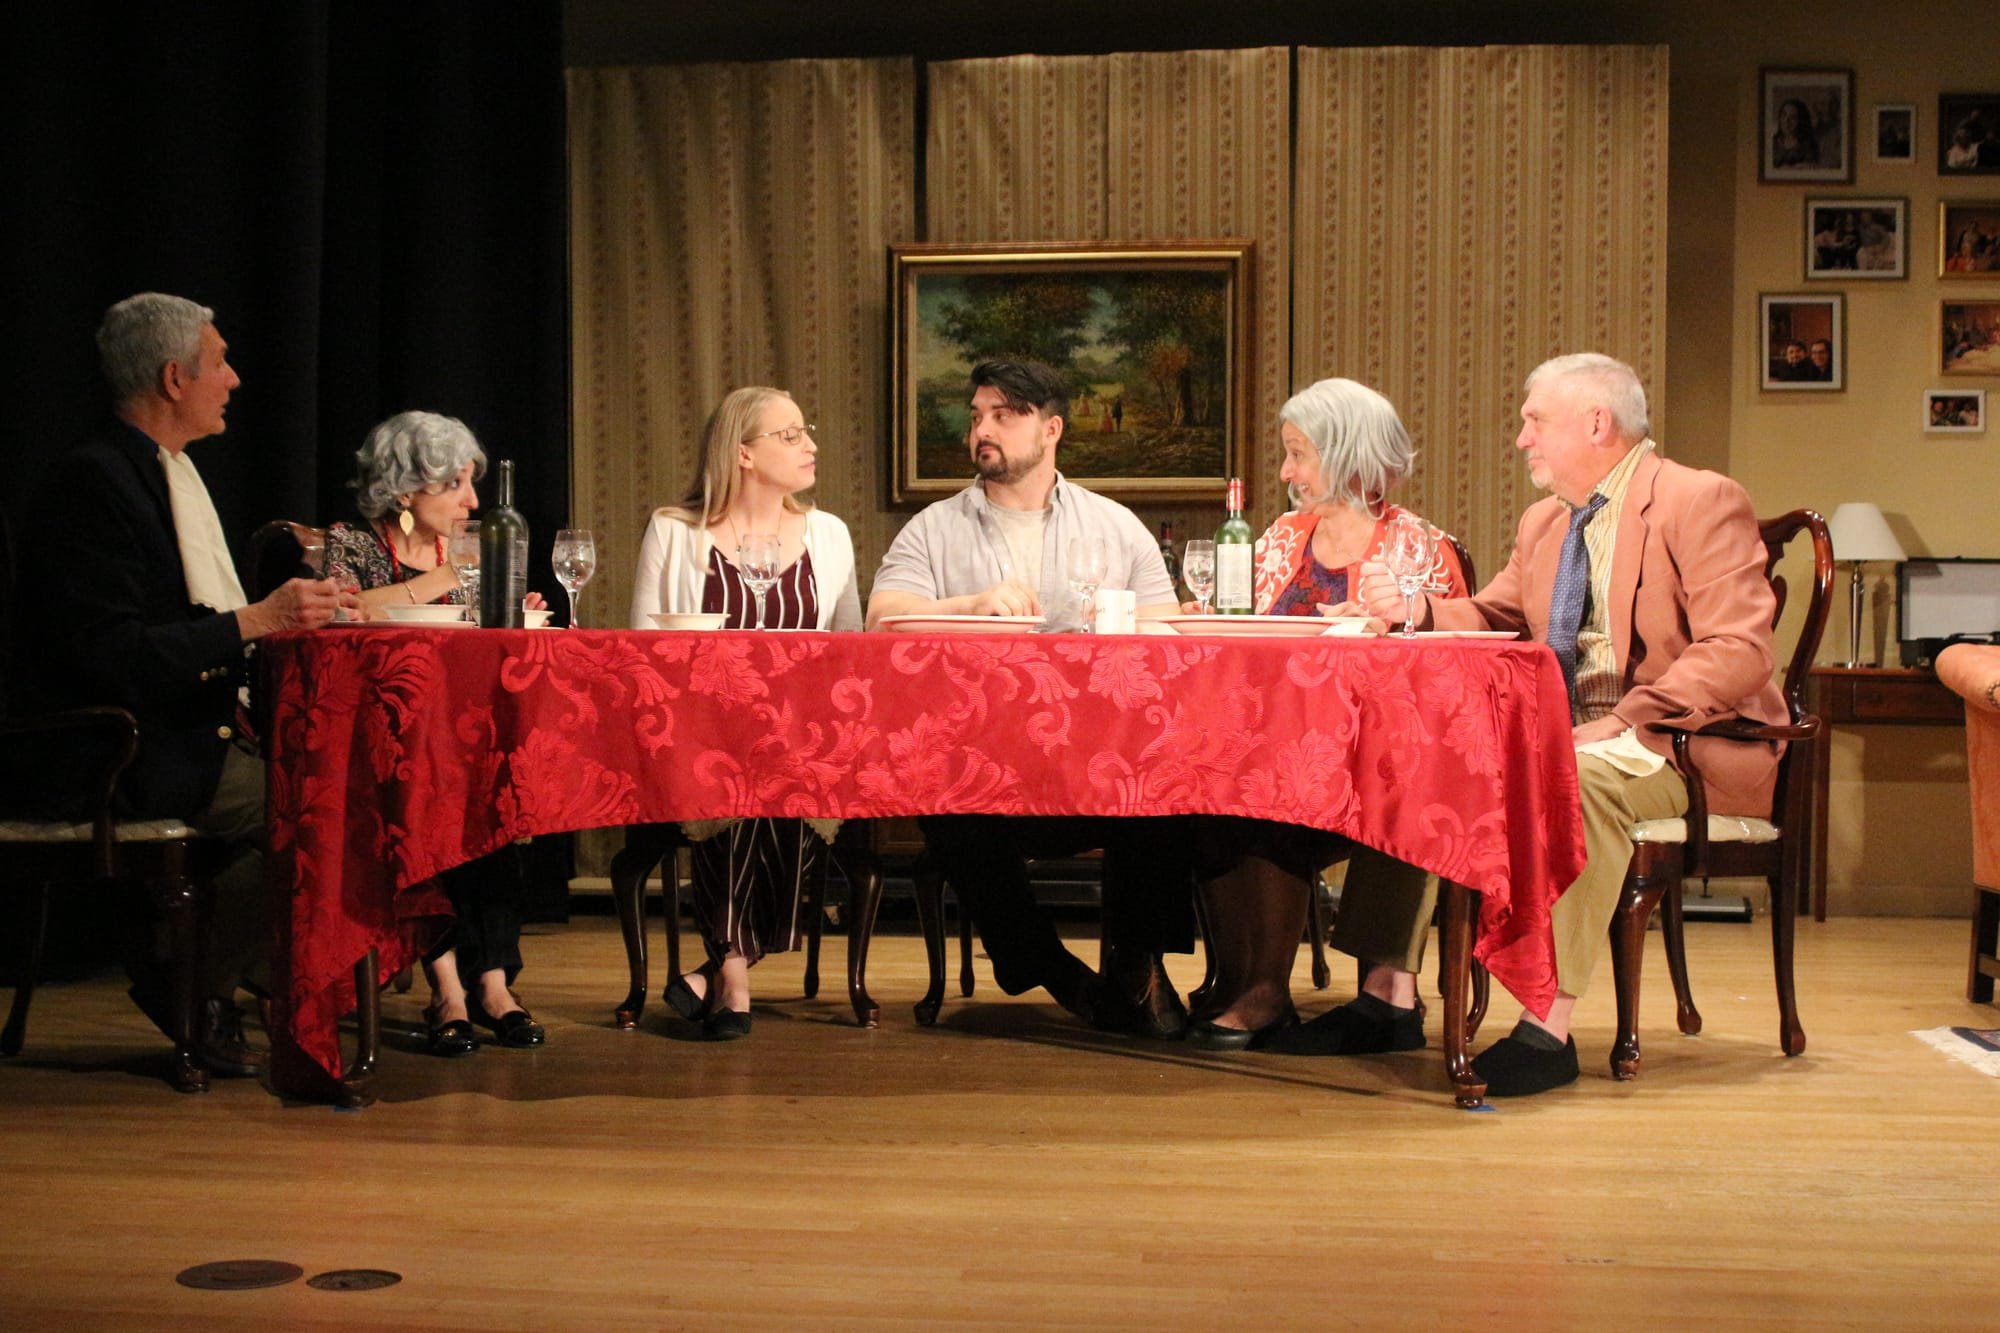 Square One Players premiere in Shrewsbury with "Over The River and Through the Woods" - PREVIEW